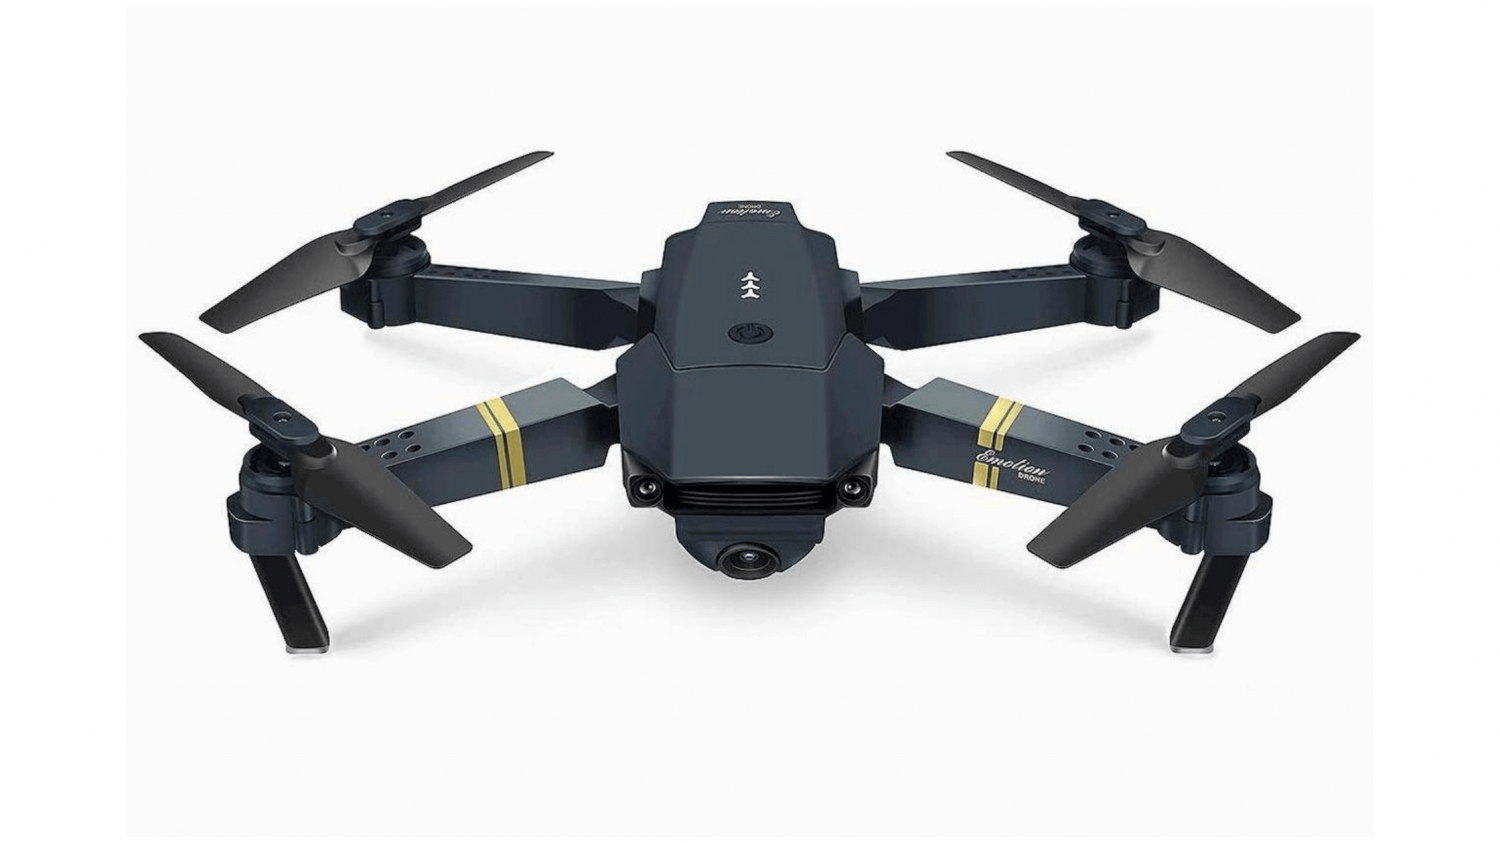 Novum Drone Reviews - Is It Right For You? What to Know Before Buy!